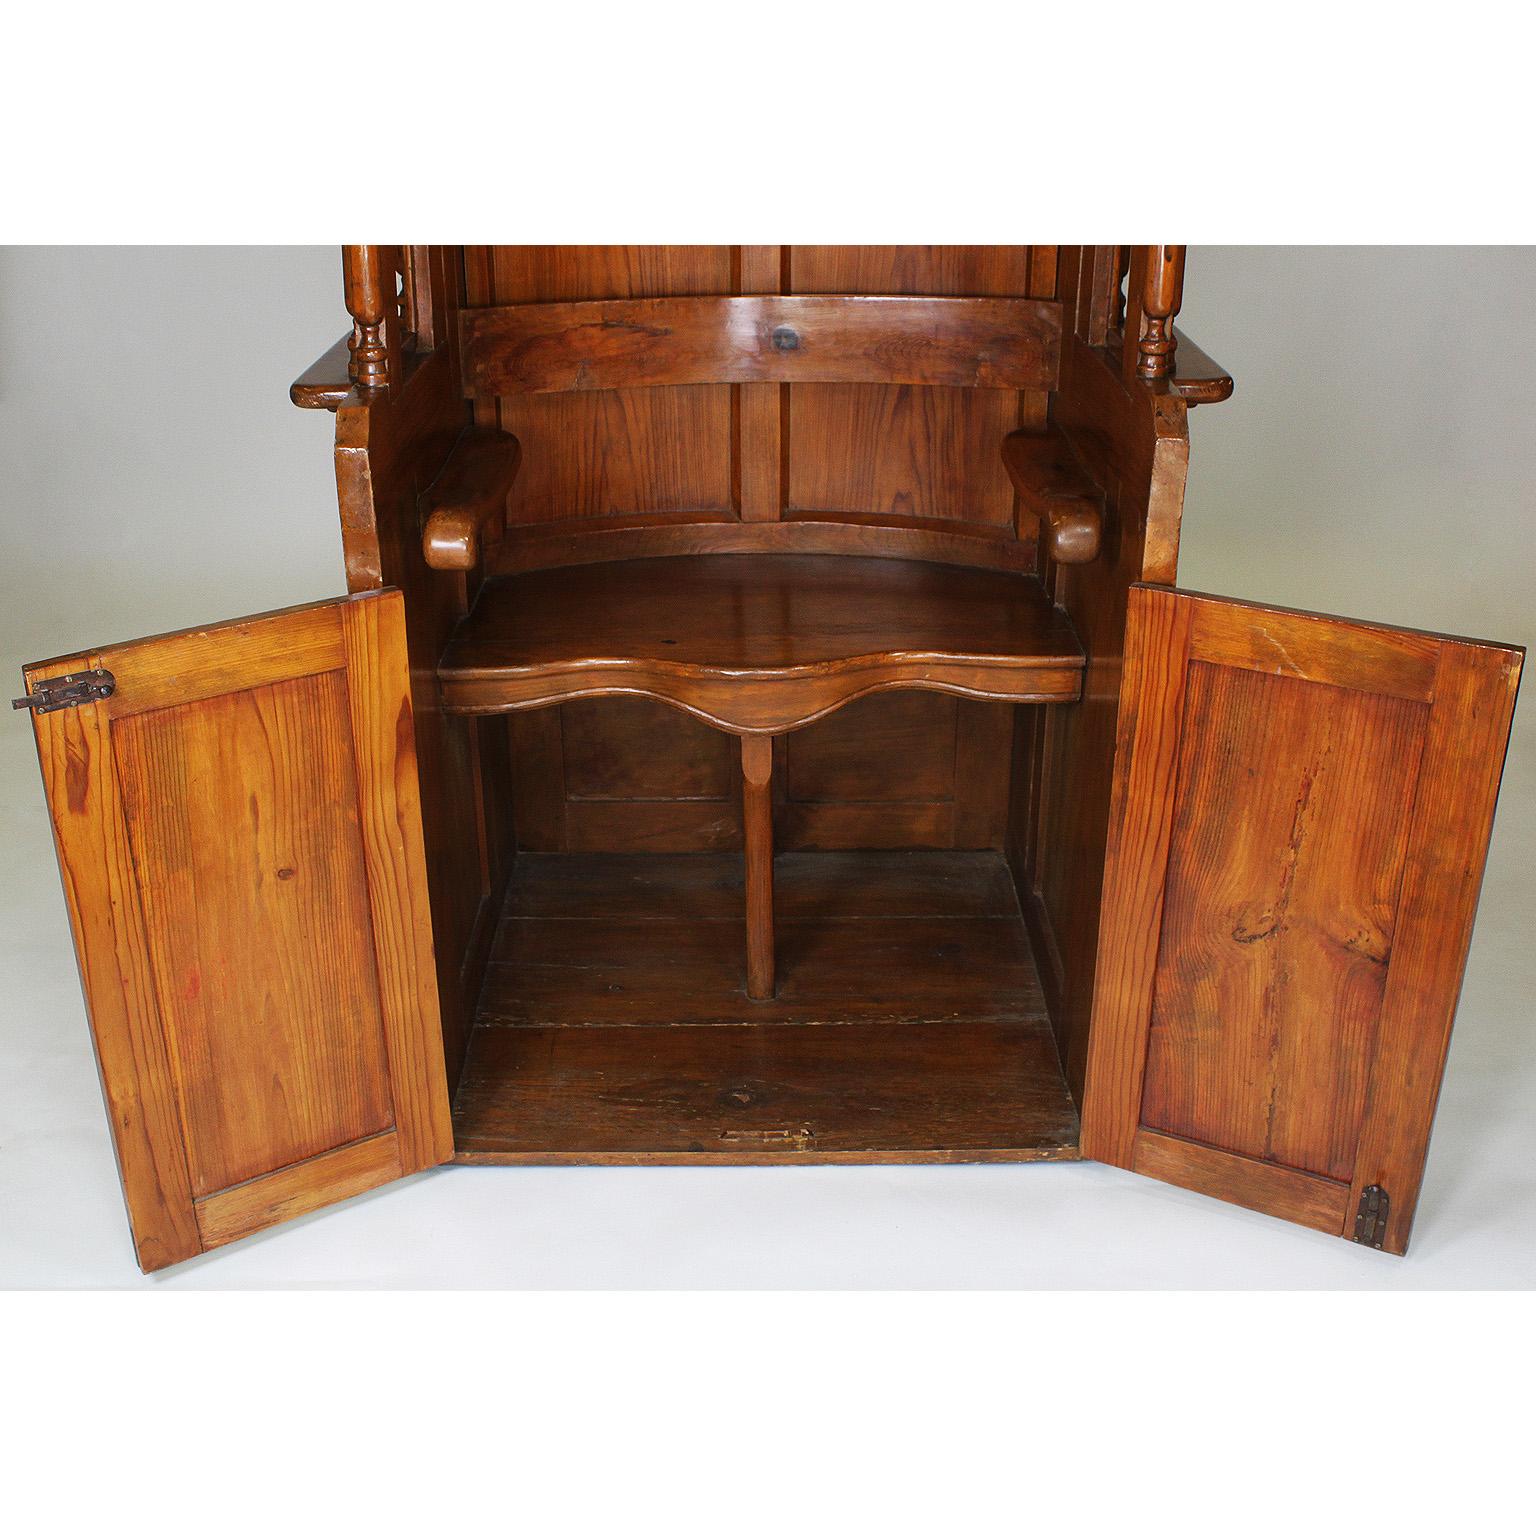 Baroque Revival Rare Italian 19th Century Carved Pine Catholic Church Confessional Stall, Booth